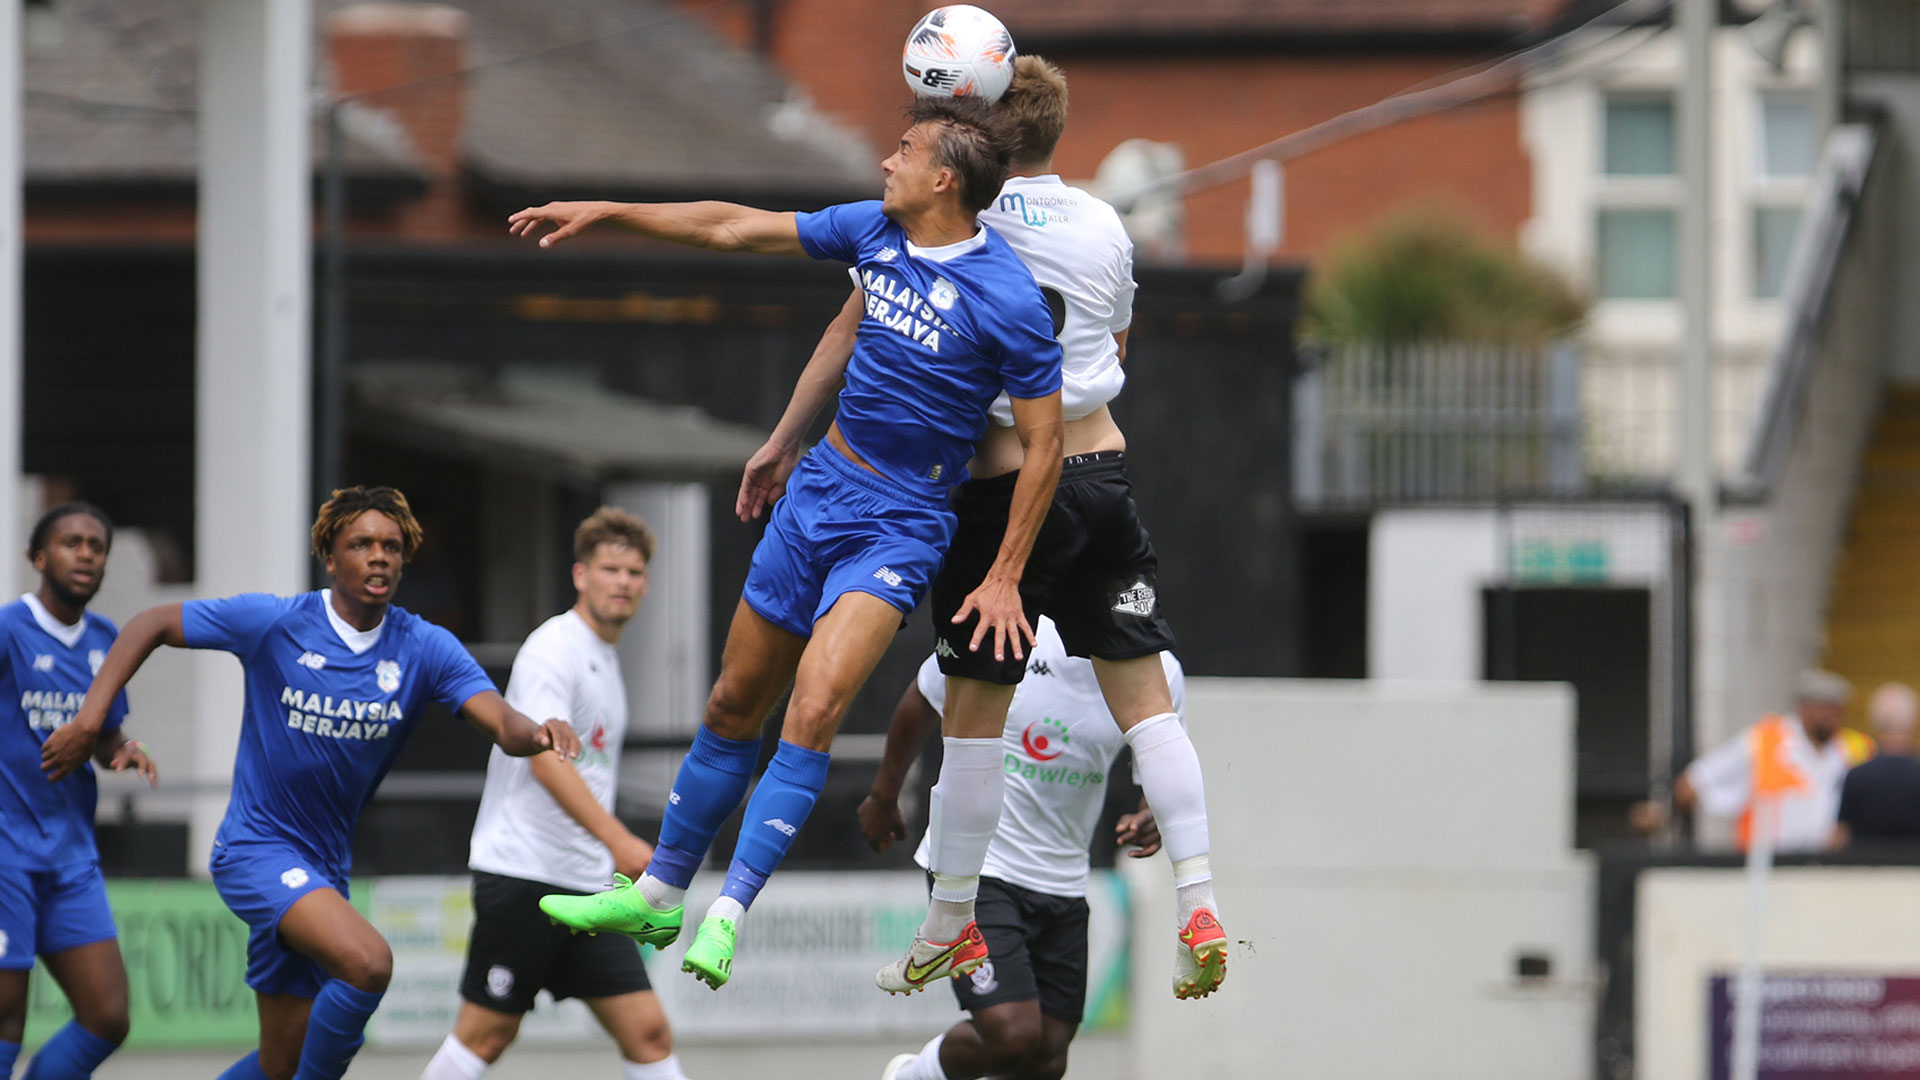 The Bluebirds took on Hereford on Sunday afternoon...